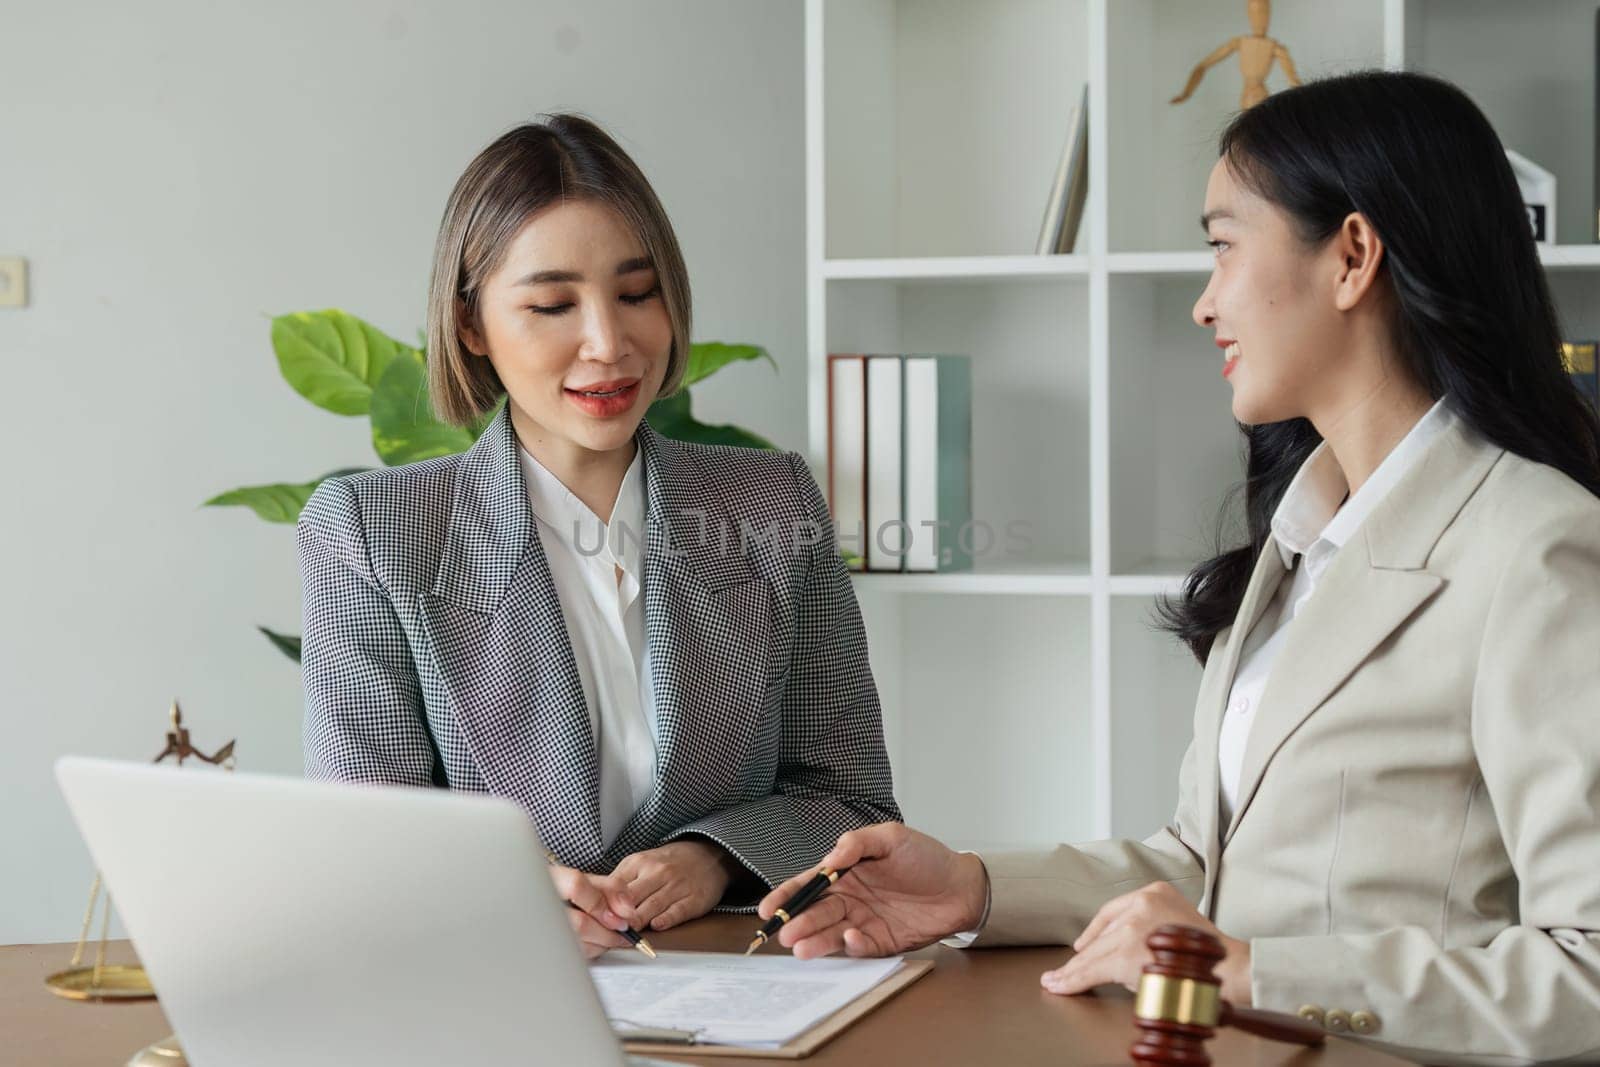 Lawyer advise client on business matter and advise them to sign document by itchaznong